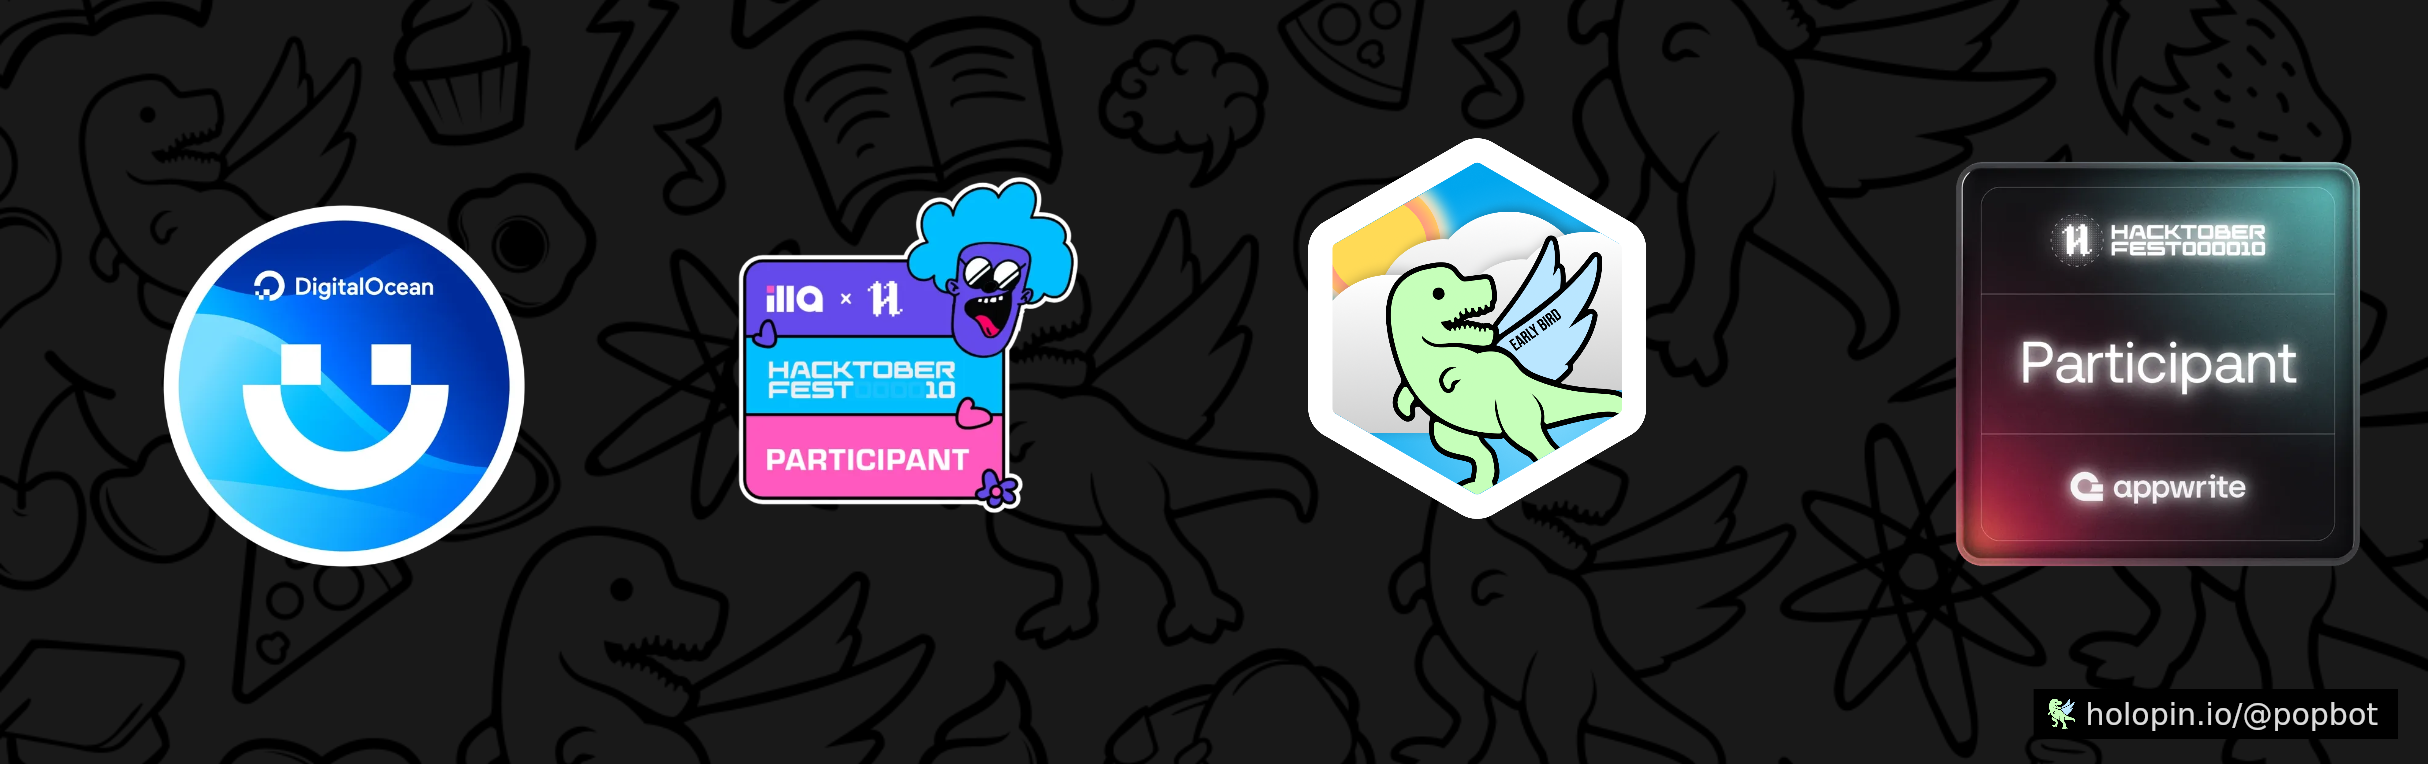 An image of @popbot's Holopin badges, which is a link to view their full Holopin profile